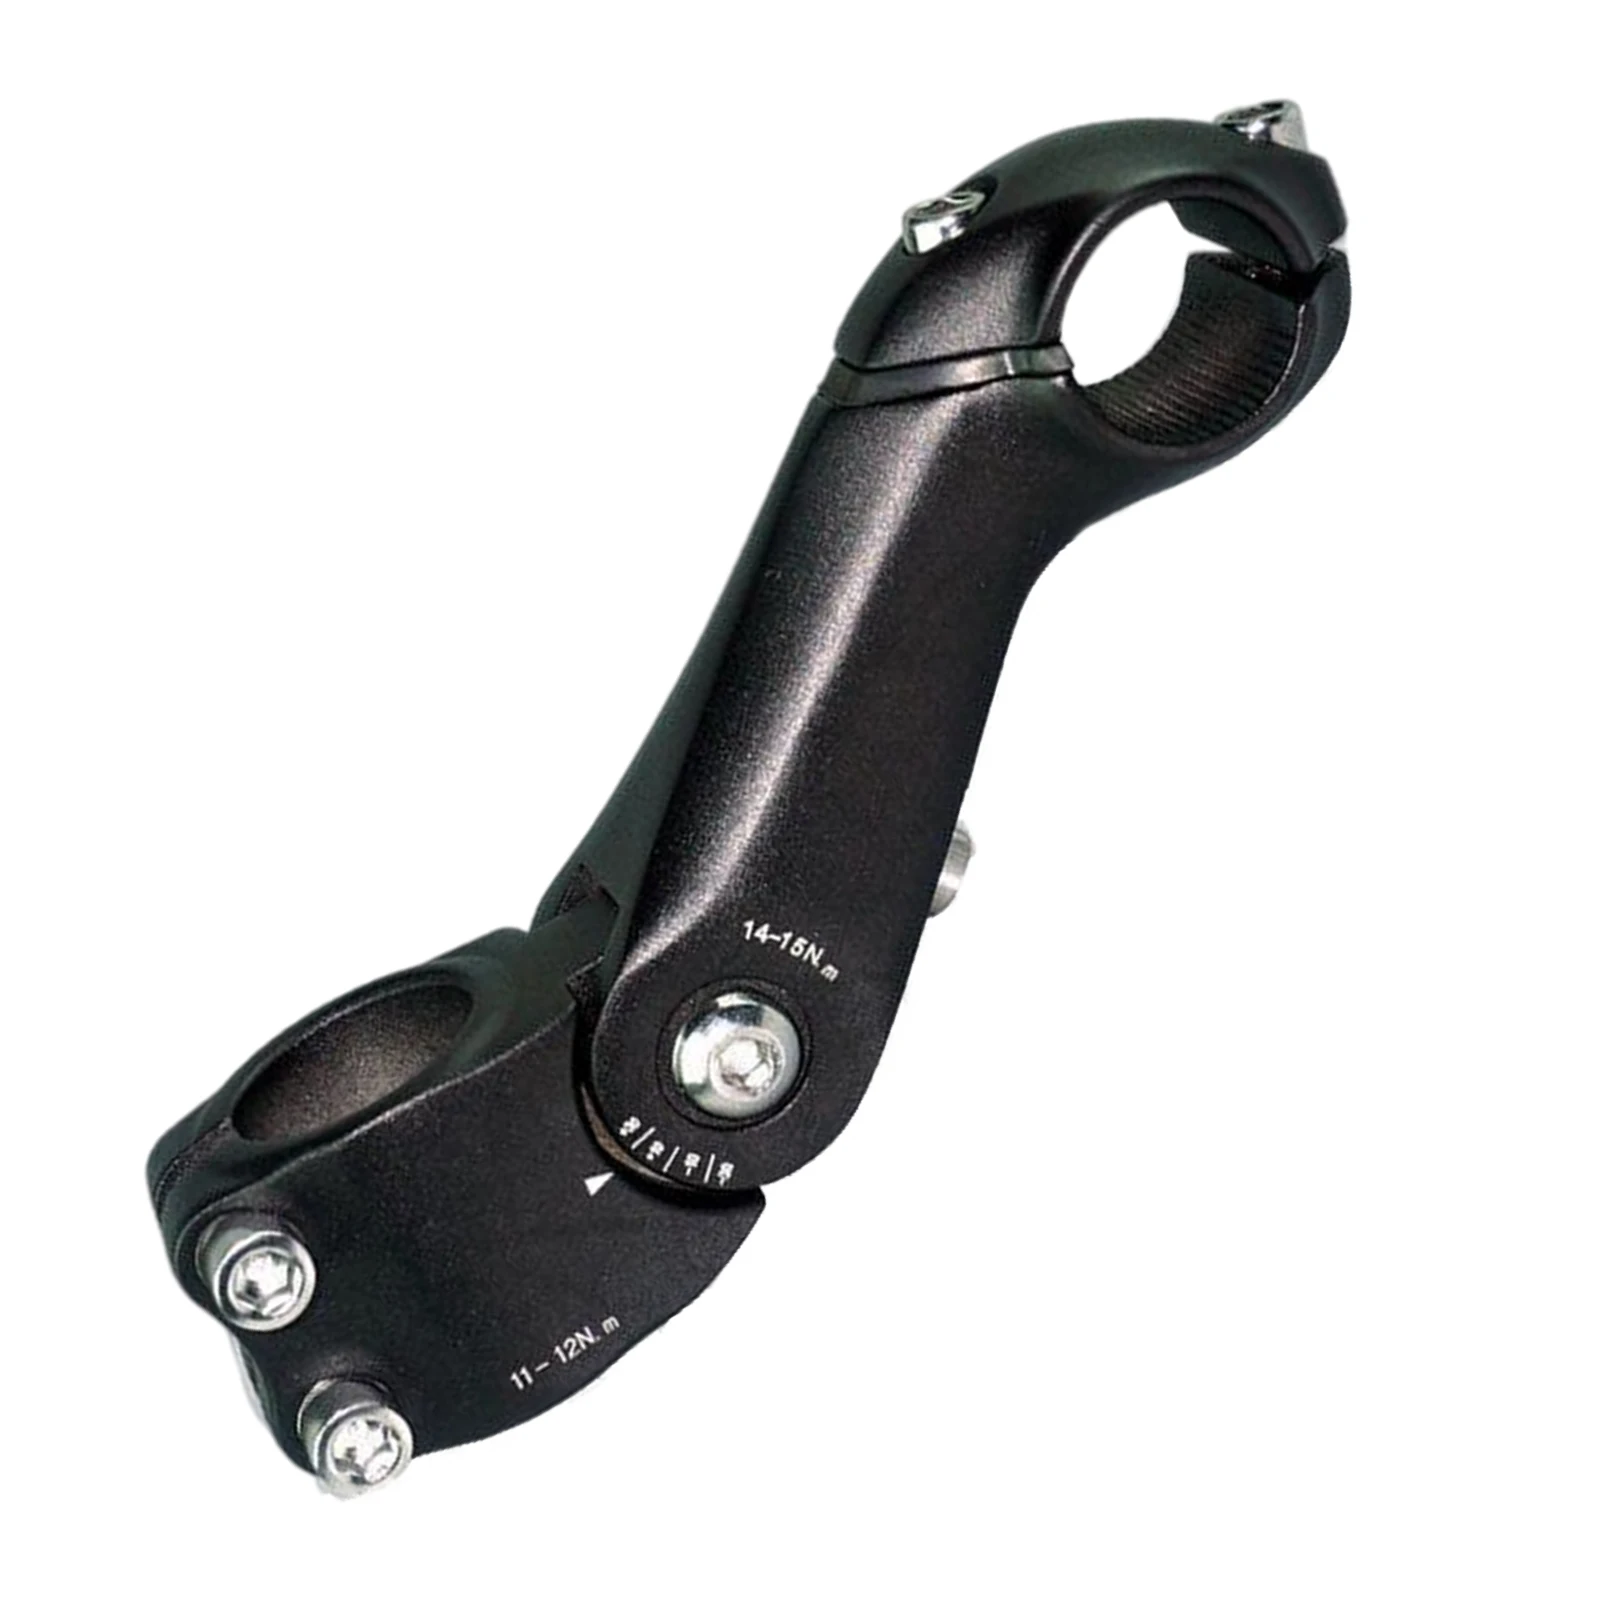 Adjustable MTB Stem for Bike Shorts Handlebar Stem 25.4MM Aluminum Alloy Mountain Road Bicycle Cycling Stems Part